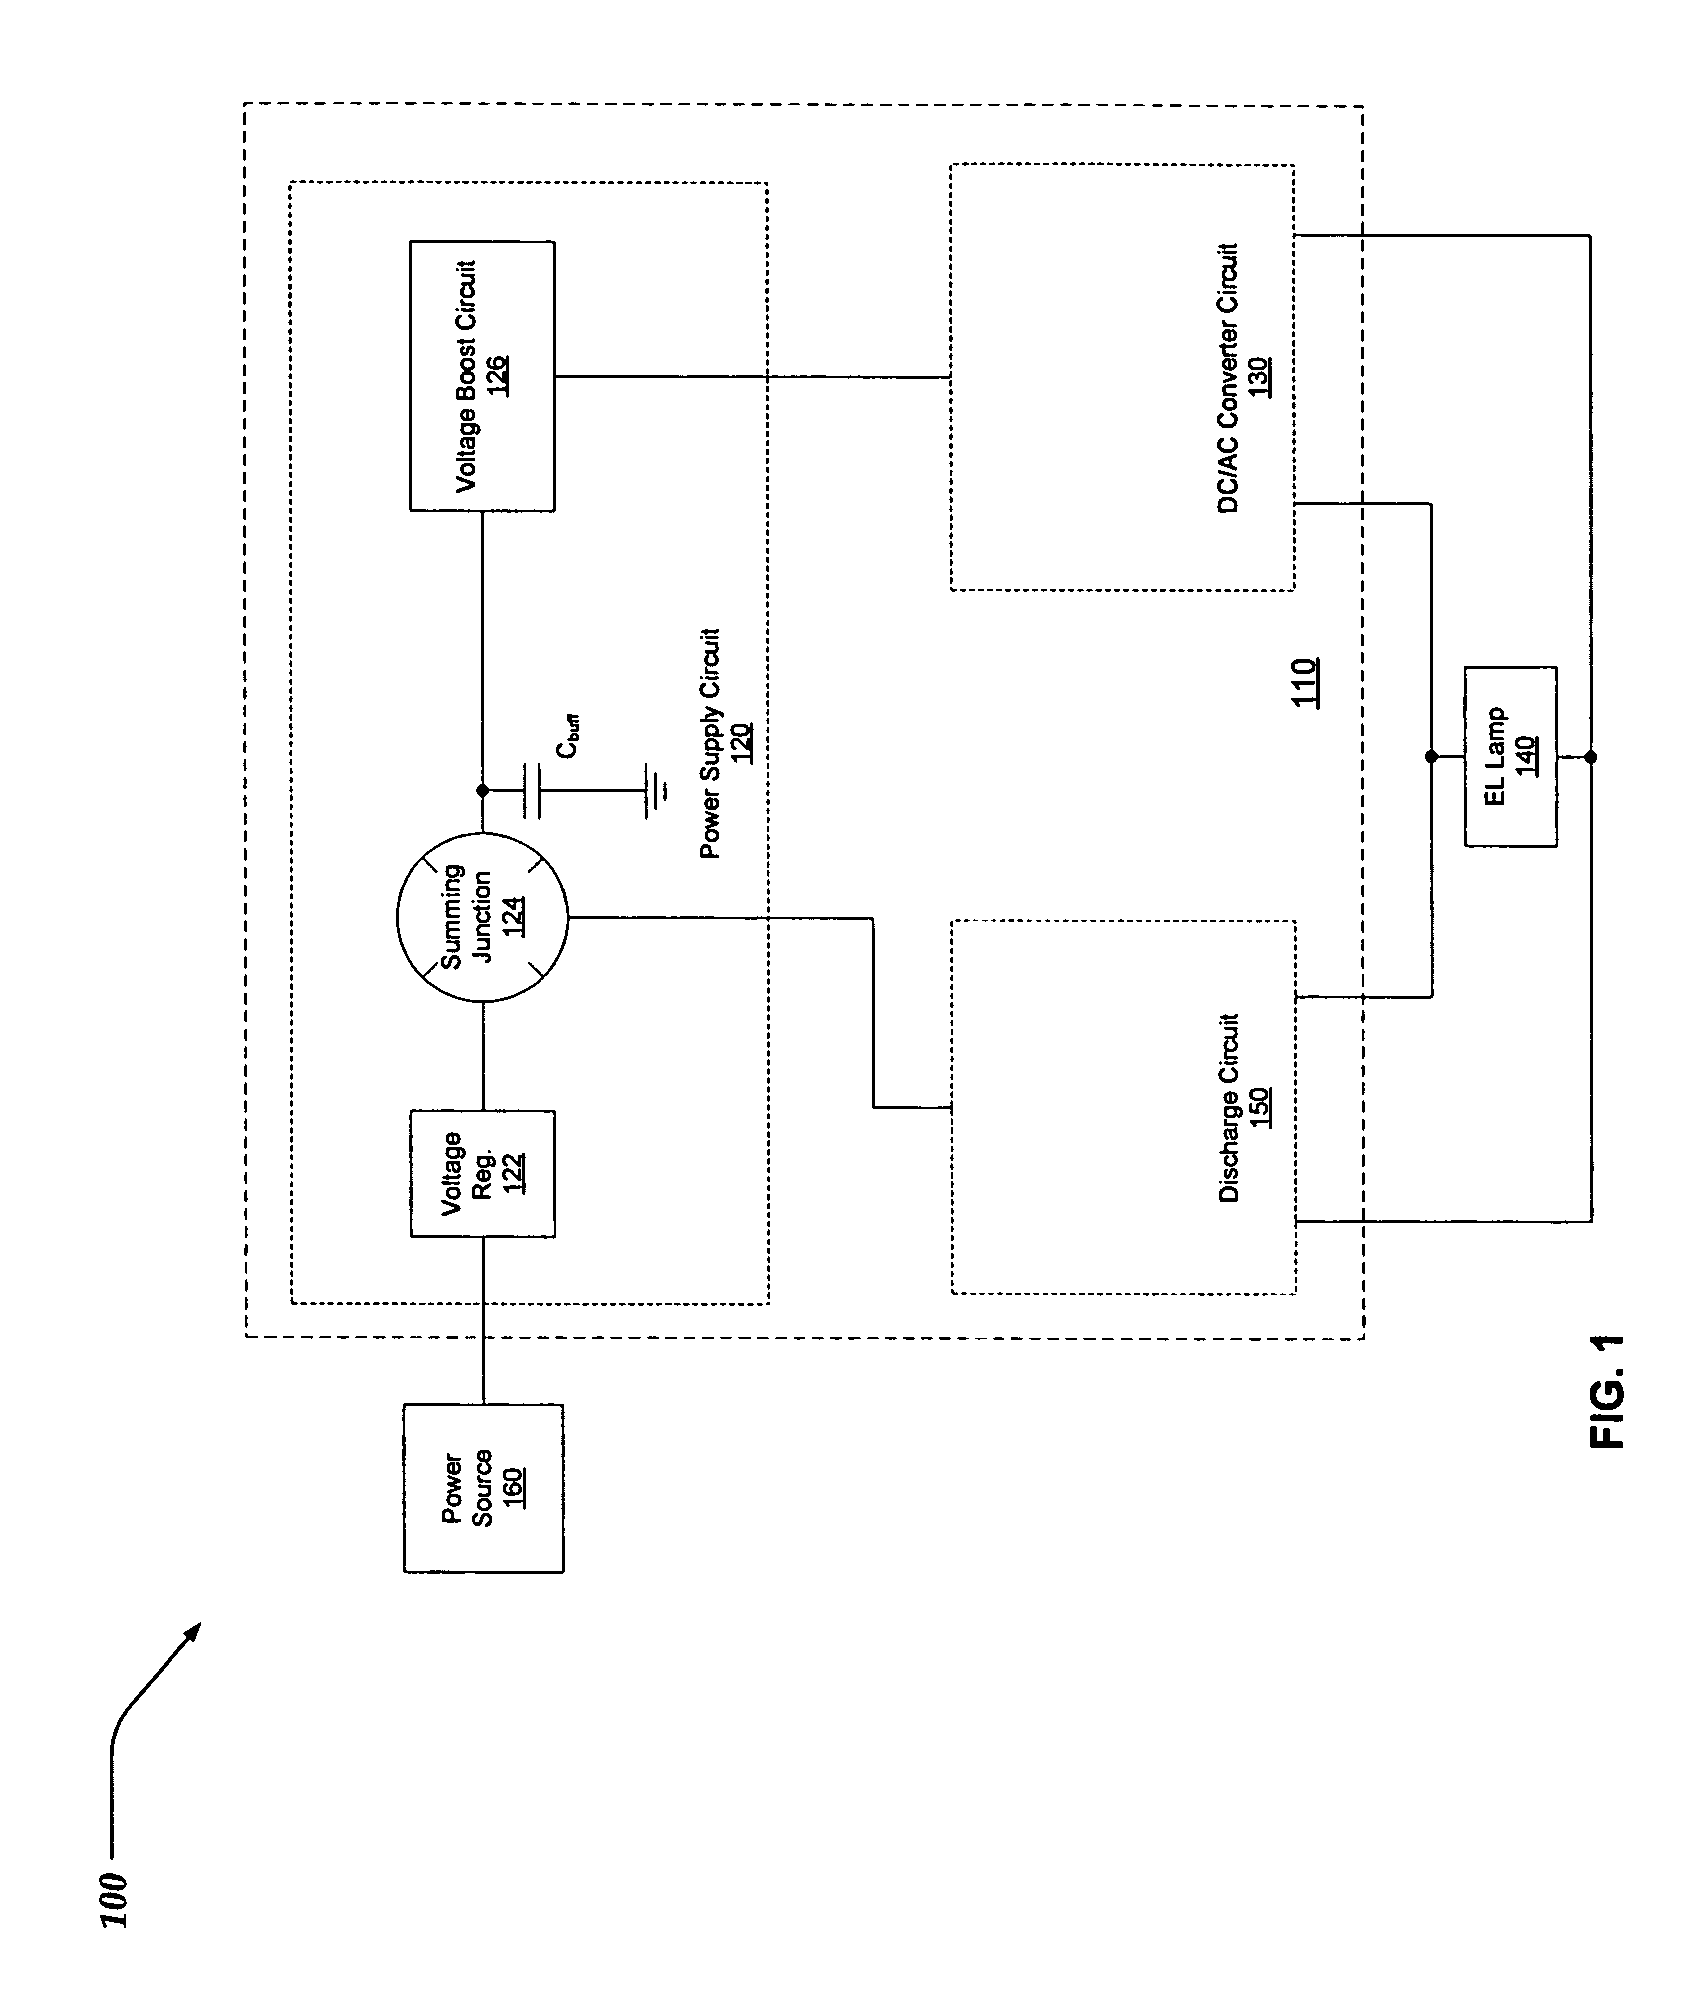 Synthesized resonation for an EL driver circuit